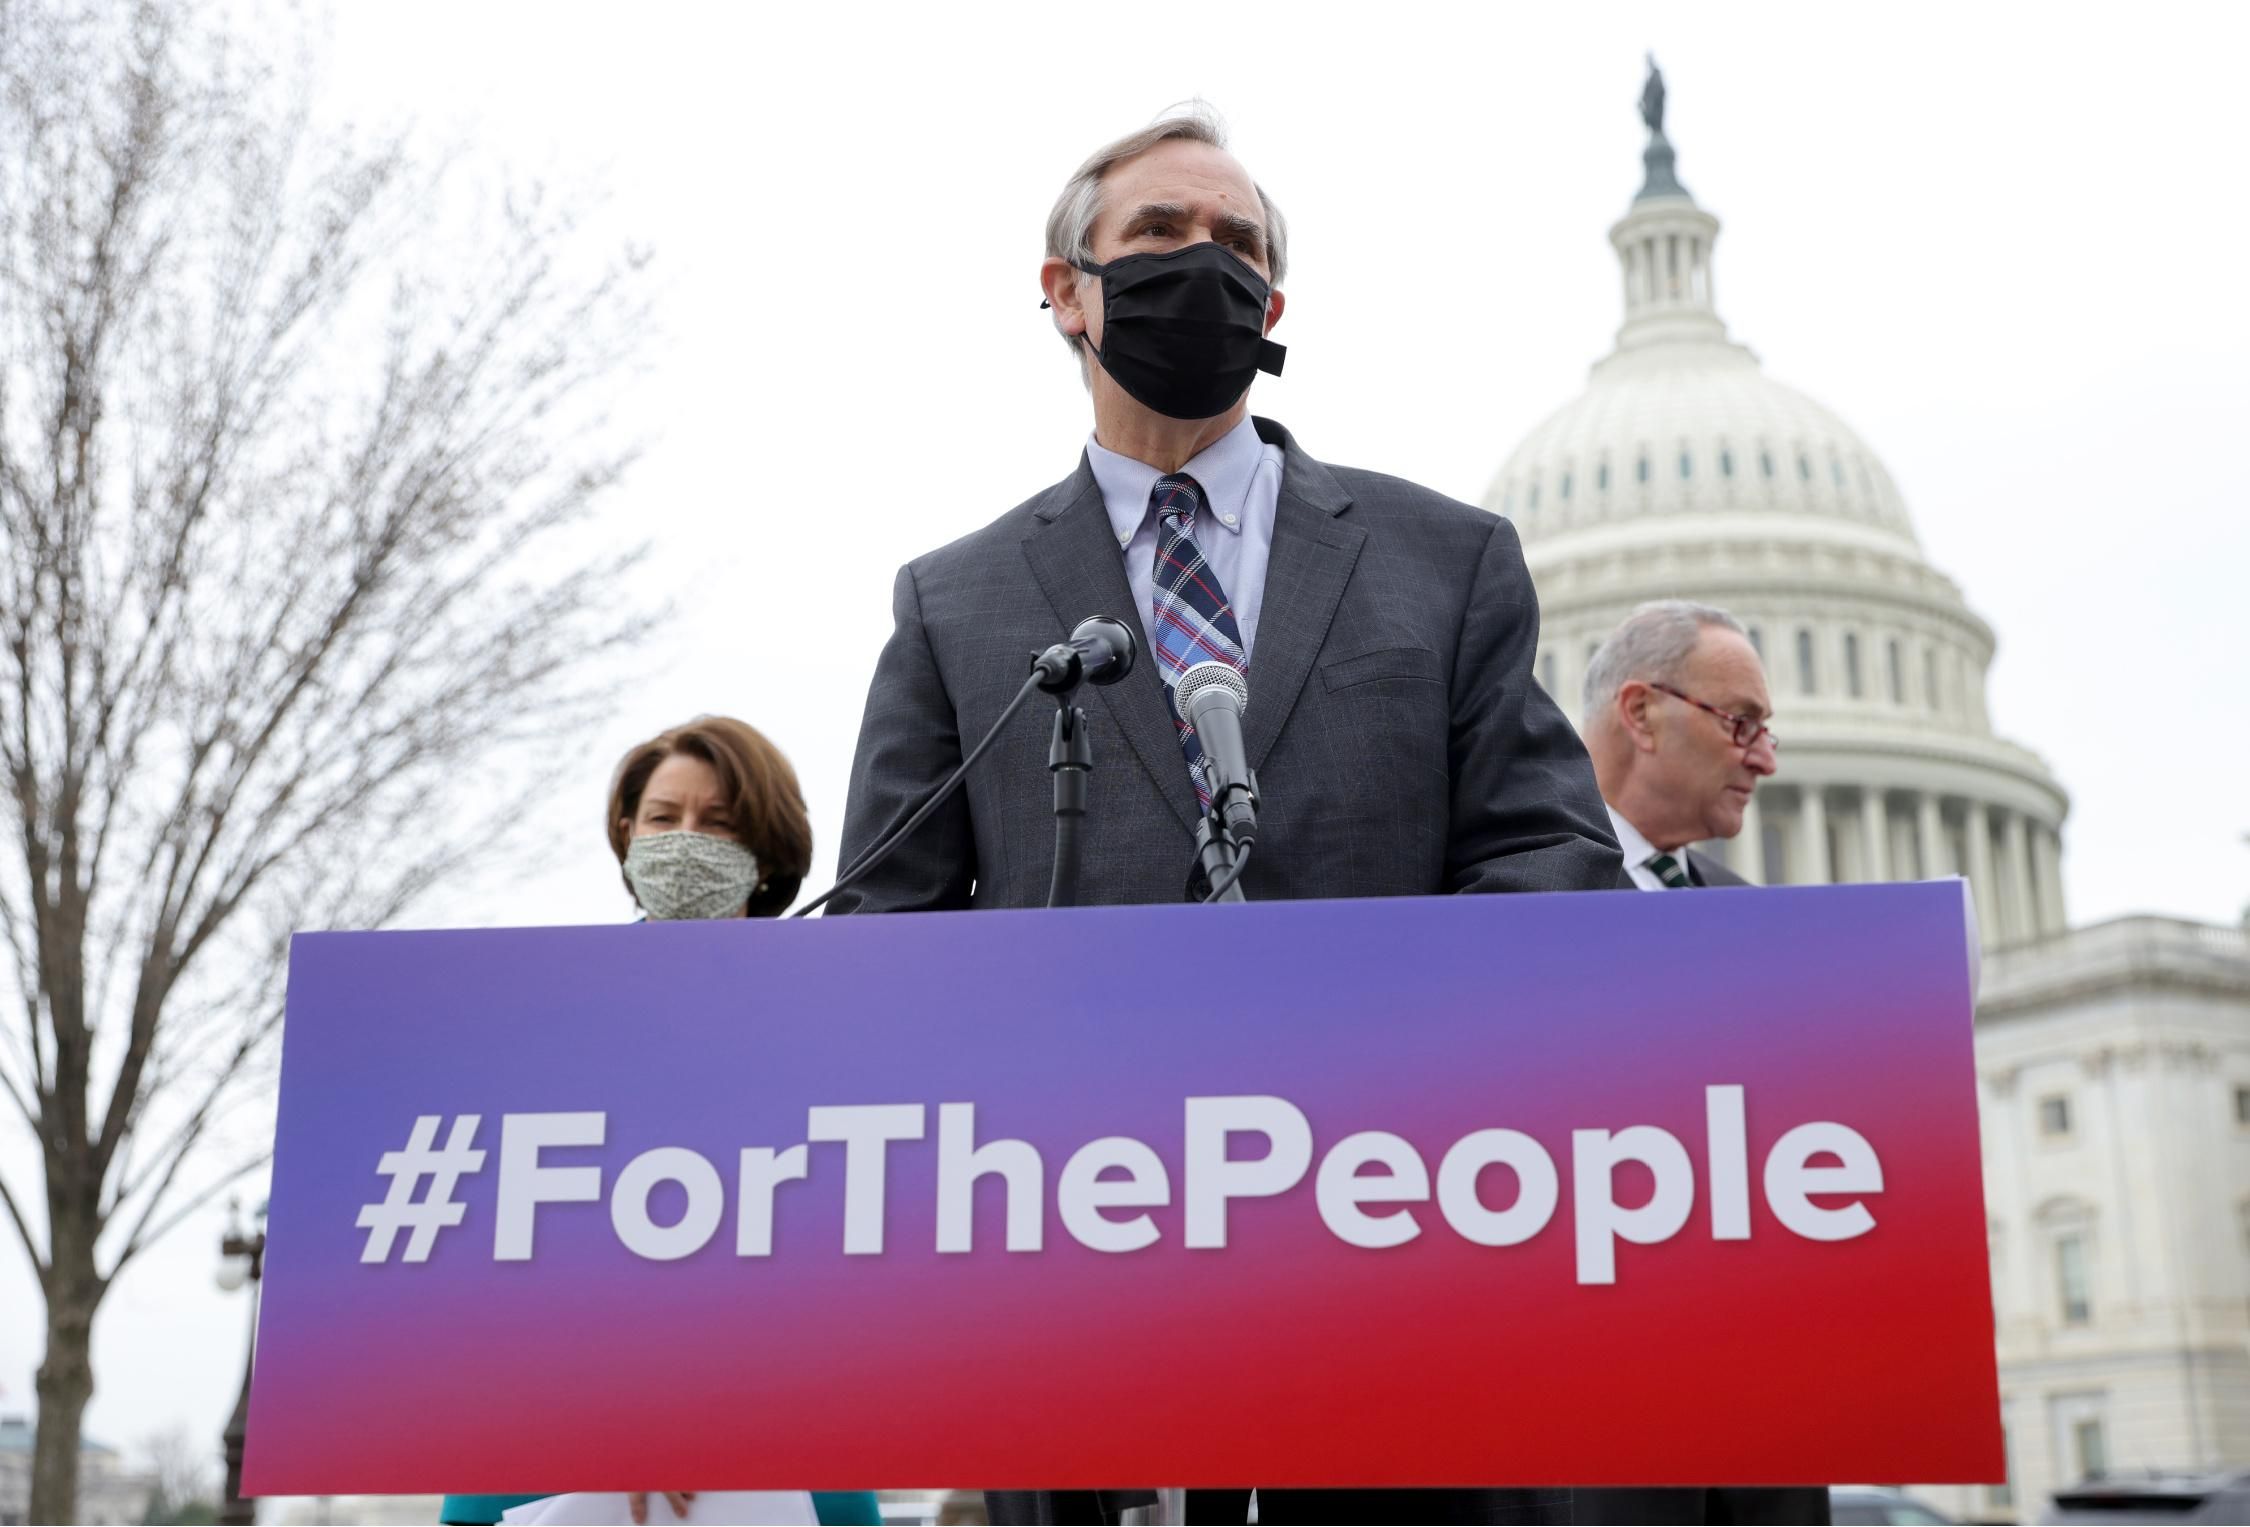 Sen. Jeff Merkley (D-Ore.), Senate Majority Leader Chuck Schumer (D-N.Y.), and Sen. Amy Klobuchar (D-Minn.) announce the introduction of S.1., the For the People Act, outside the U.S. Capitol March 17, 2021 in Washington, D.C.